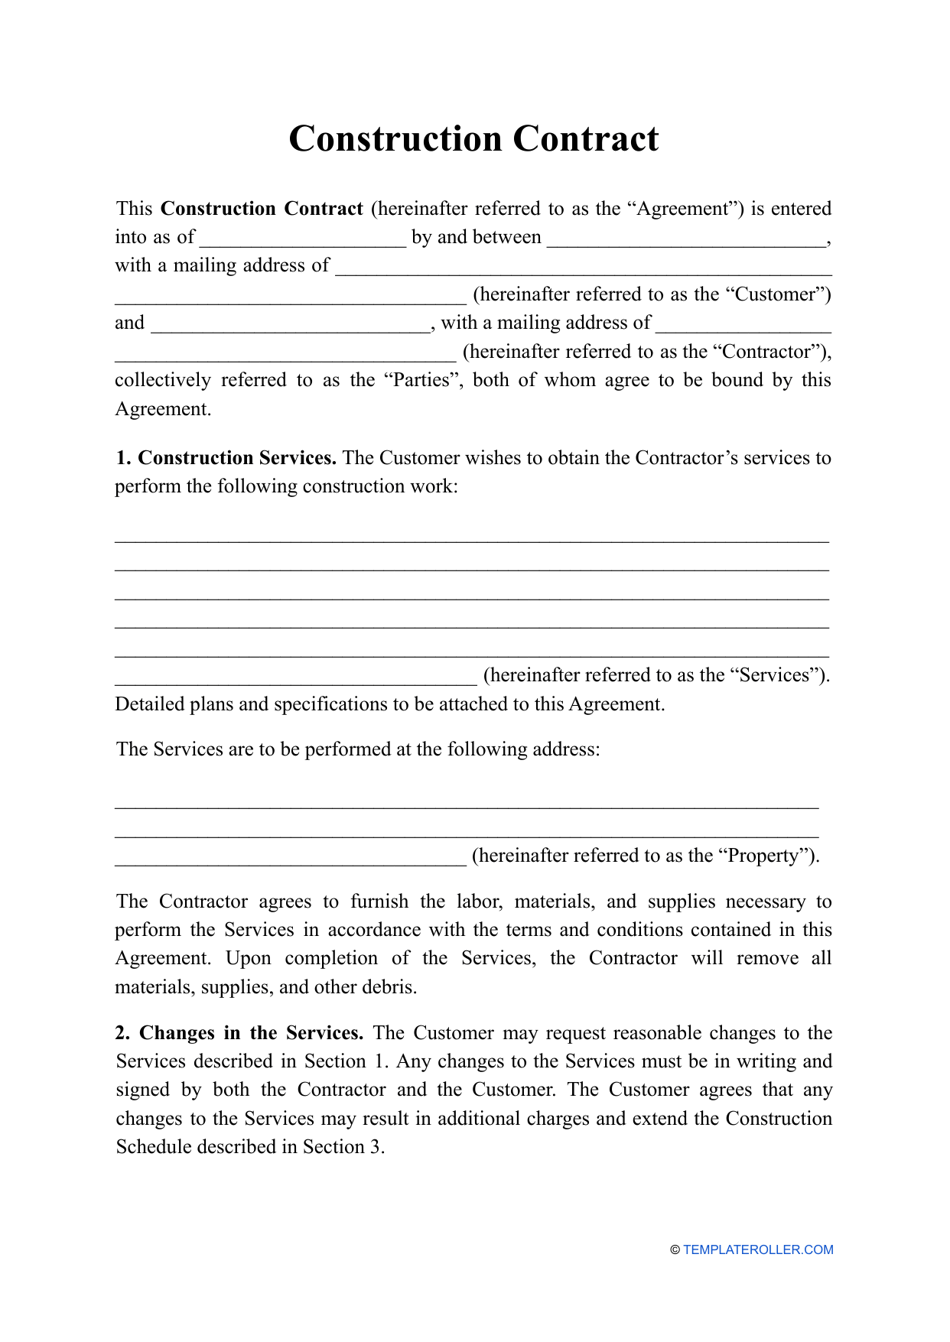 Construction Contract Template, Page 1